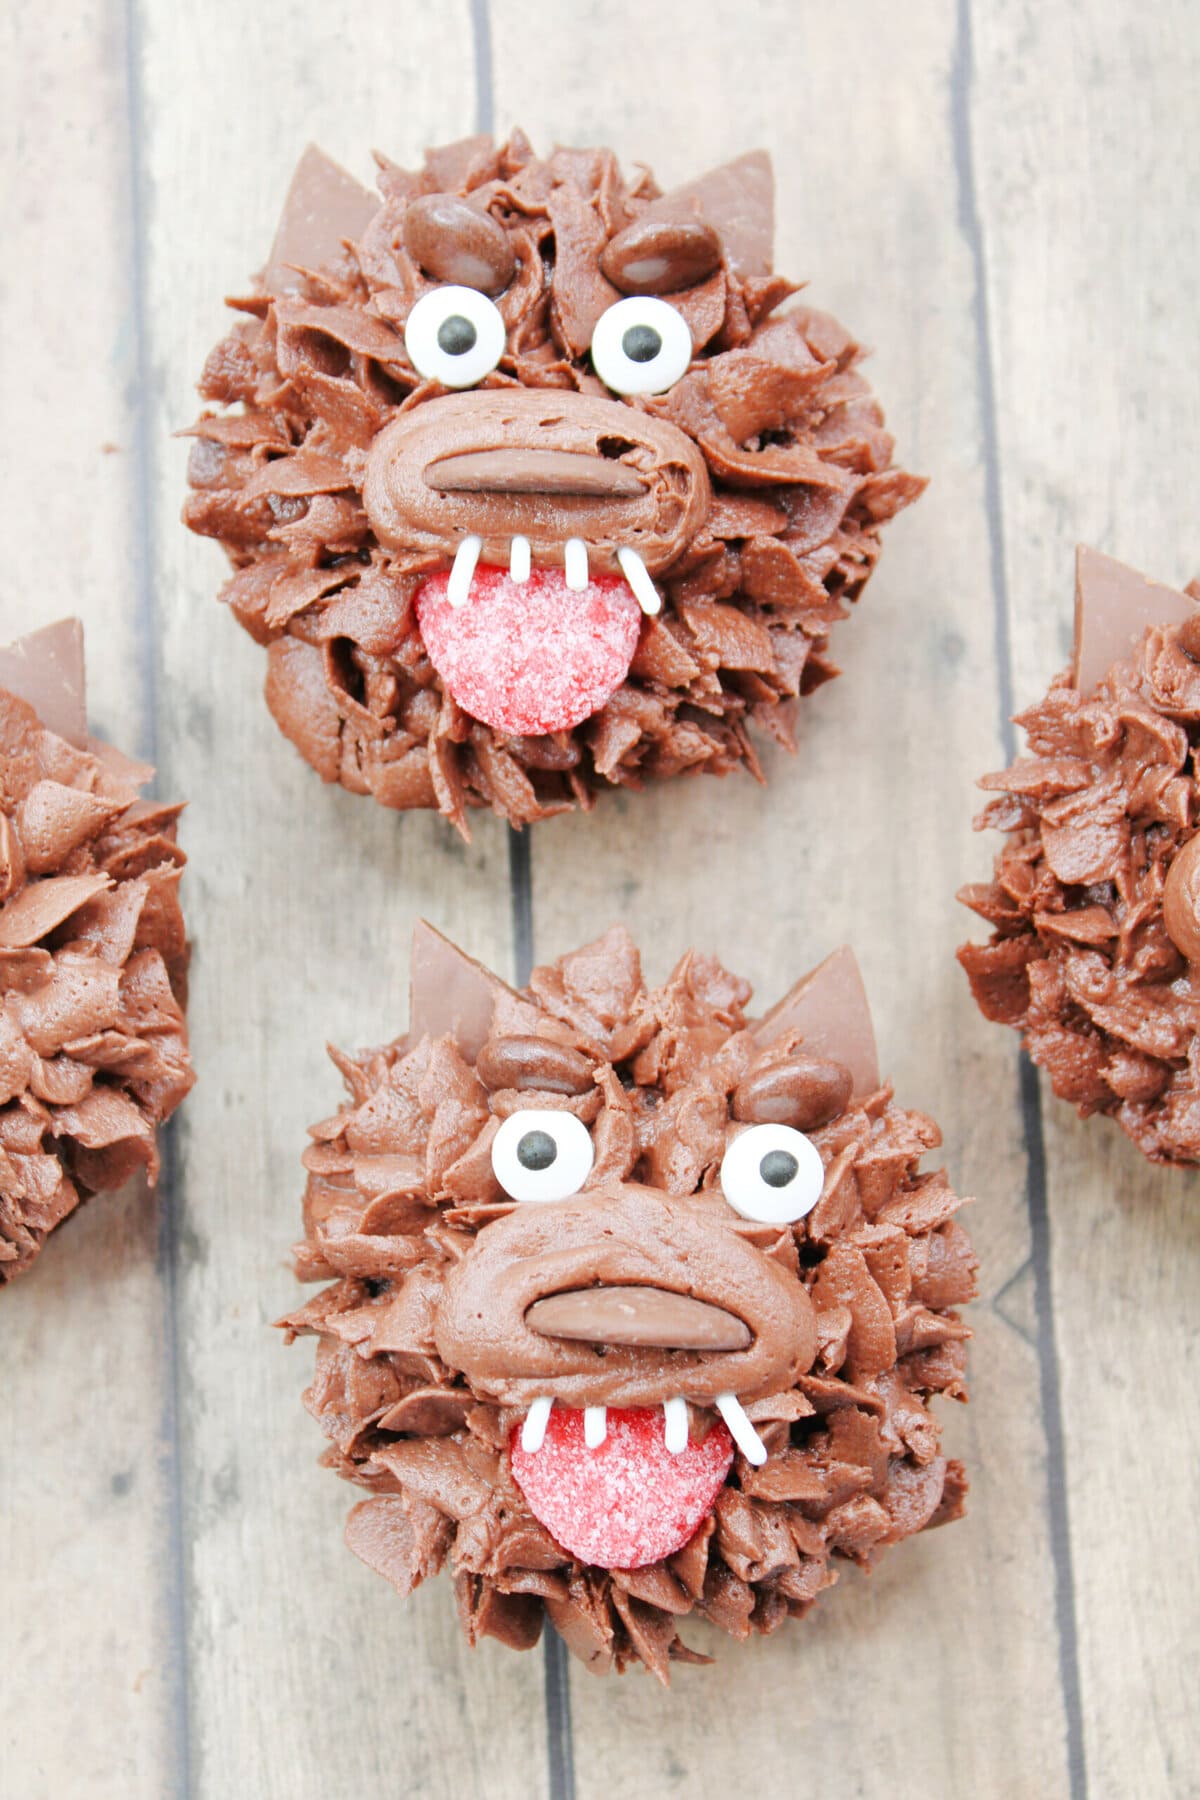 Close up of two of the Werewolf Cupcakes.